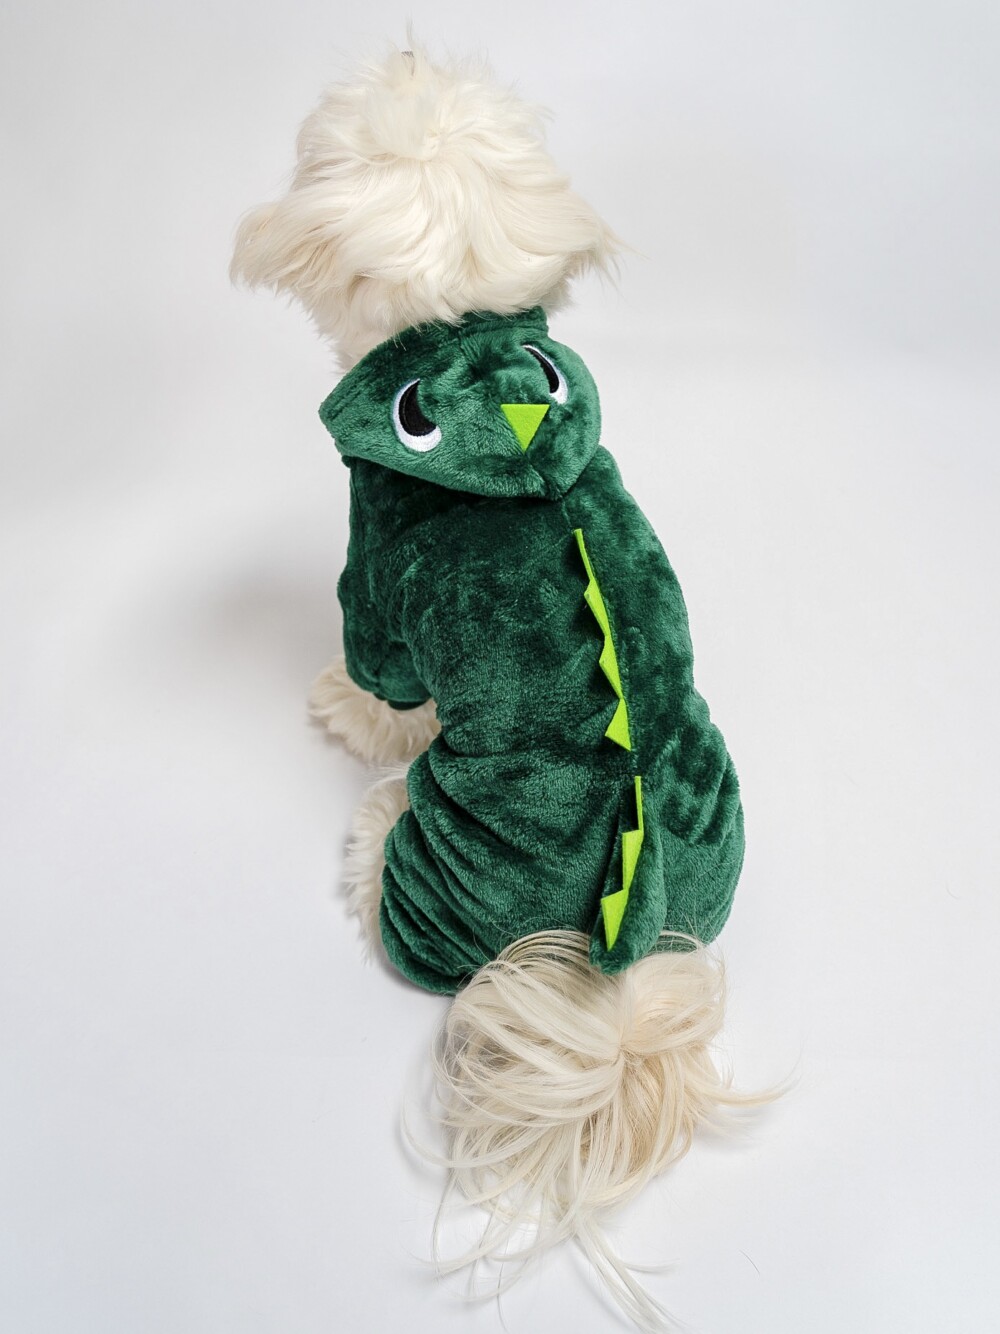 A cute small white dog wearing a green dinosaur costume from above